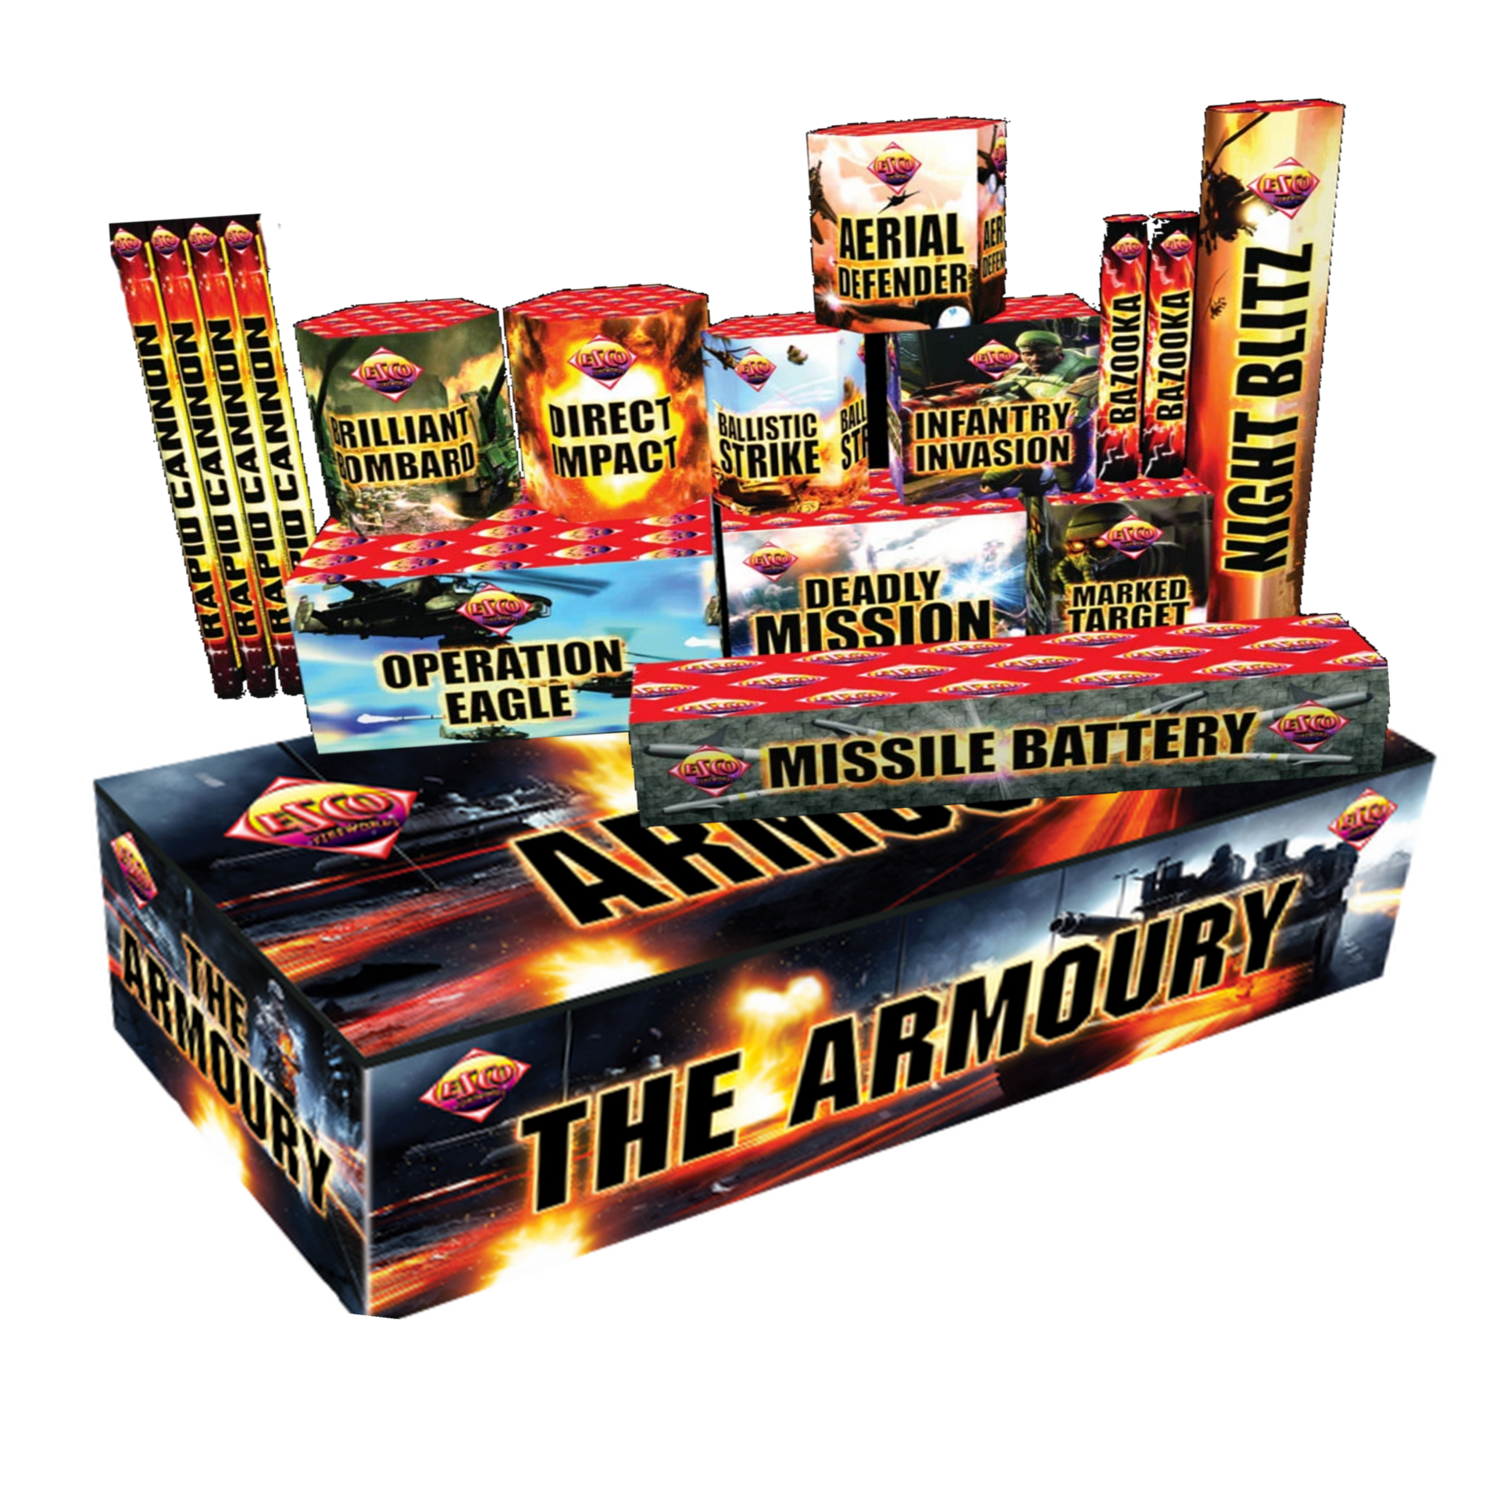 THE ARMOURY CRATE (34 FIREWORKS)